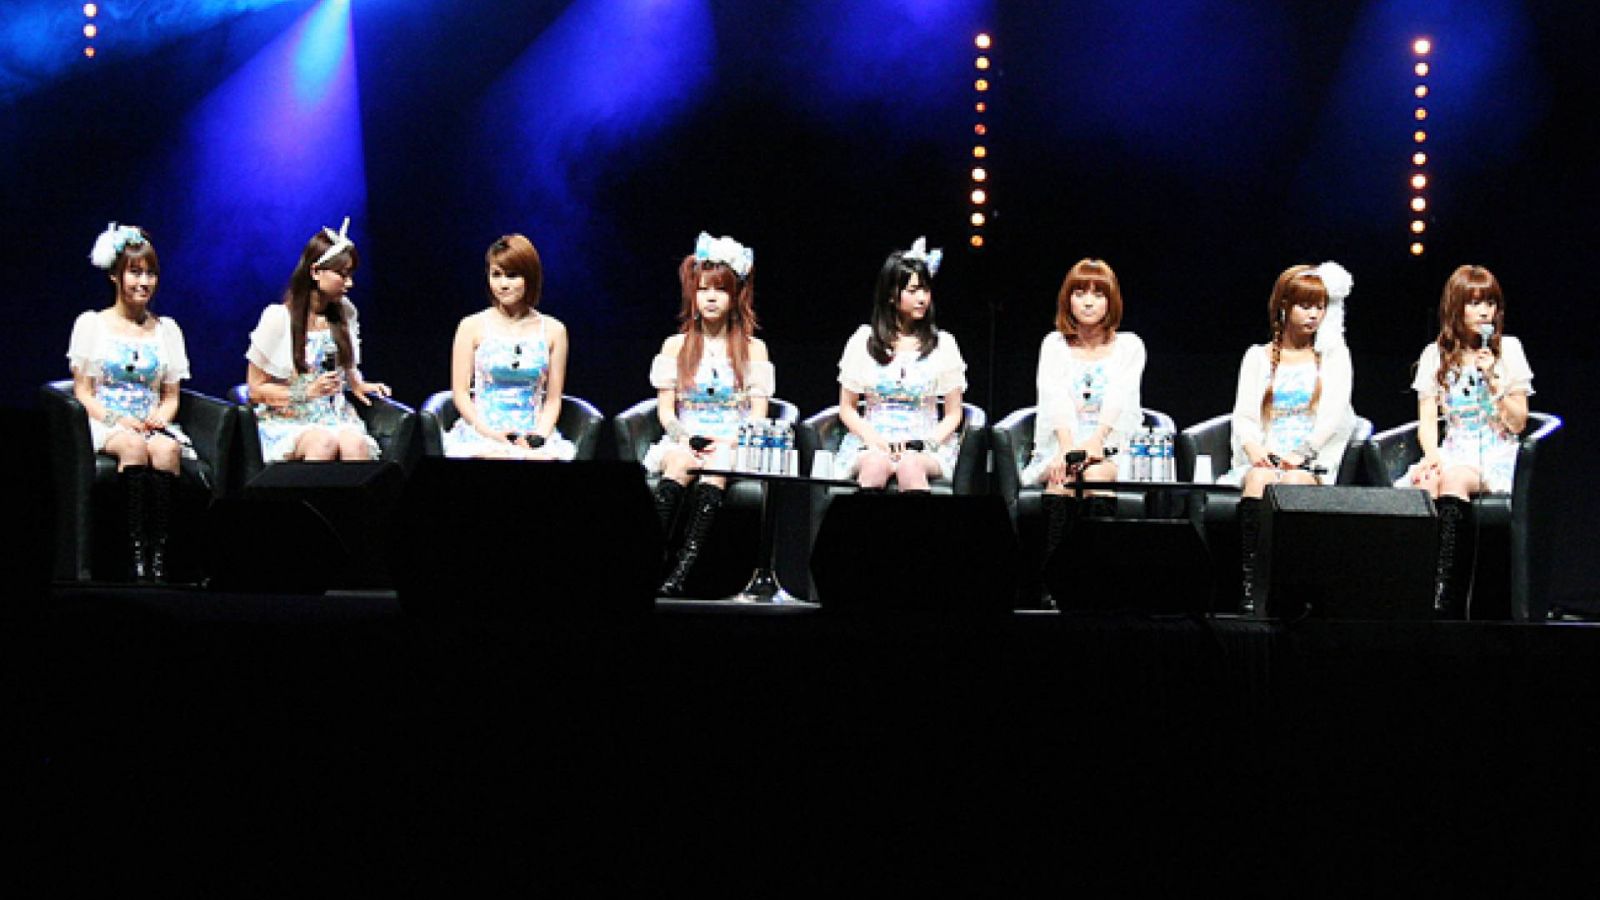 Q&A With Morning Musume at Japan Expo 2010 © Morning Musume. - JaME - Jeremy Corral